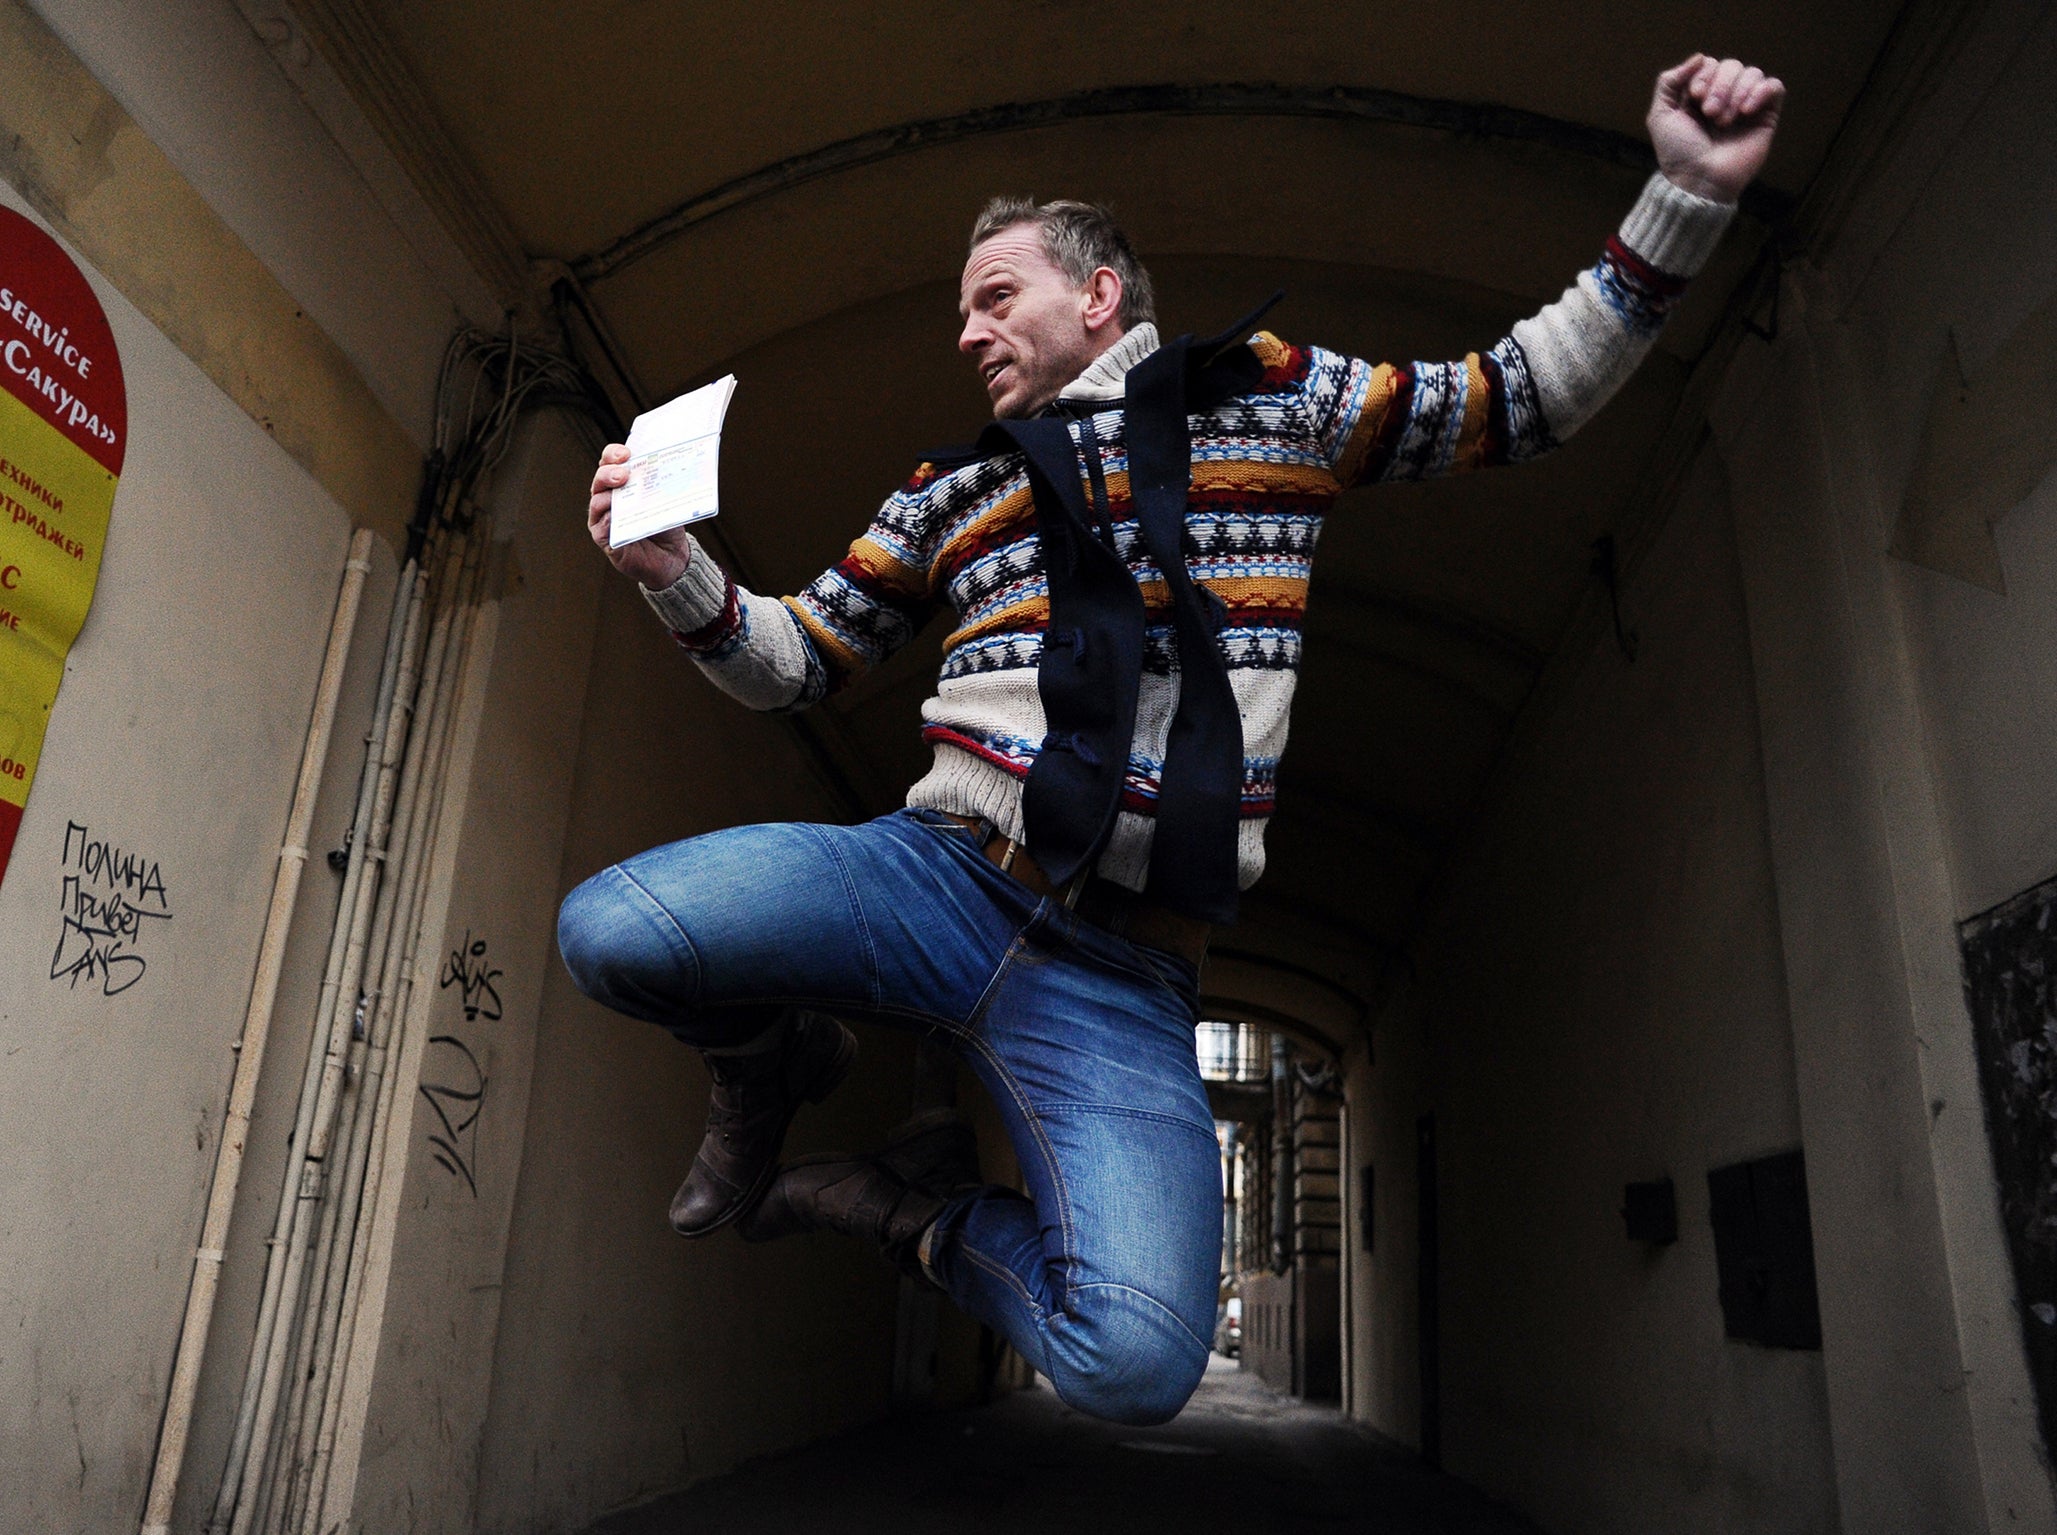 Greenpeace International activist Mannes Ubels from the Netherlands jumps for joy holding his passport outside of the offices of the Federal Migration Service Department in St. Petersburg after receiving a Russian transit visa